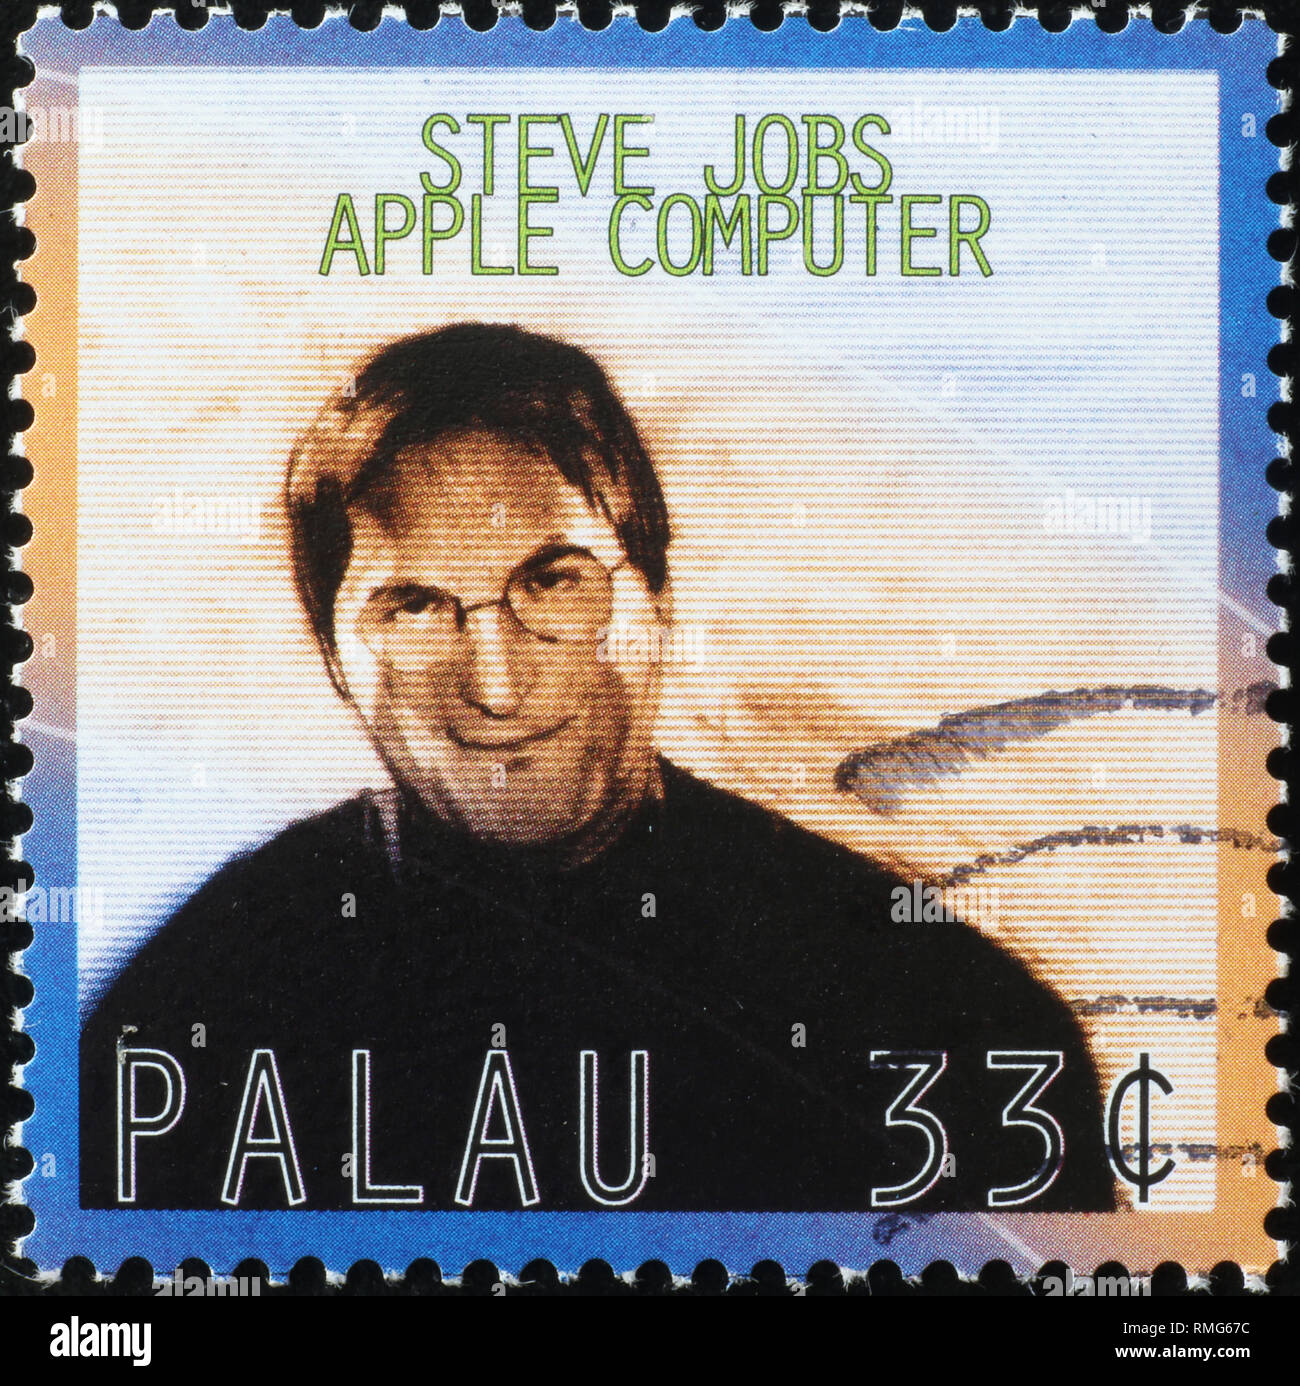 Steve Jobs, Co-founder of Apple Computers on stamp Stock Photo